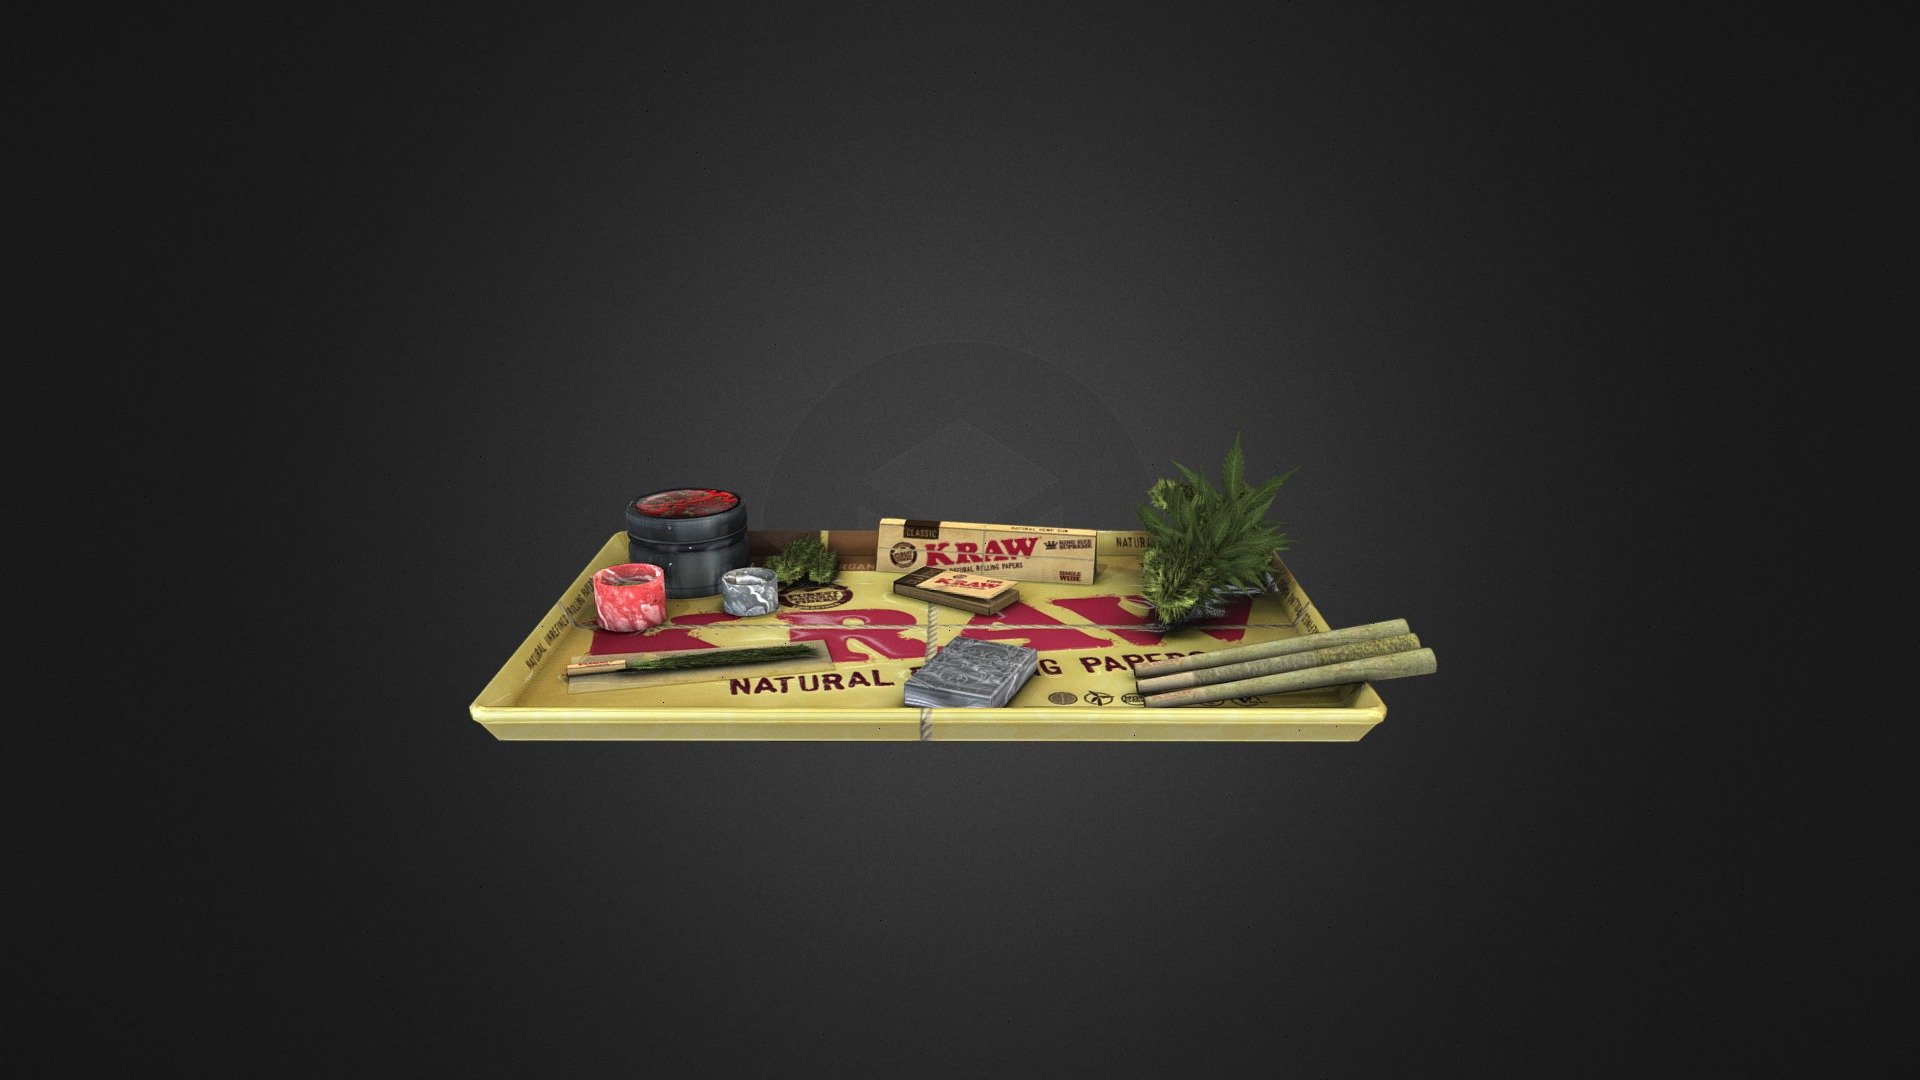 Weed Kit Green Kush

The best way to roll is using a Kraw rolling kit, containg the top products of cannabis ! ( Low Poly and realistic textures )

Including items:

Kraw wood rolling tray

Kraw tips box

Kraw rolling paper box

Thunder Grinder

Classic Ligther

The most pure Kief in Resin pot

Strongest Hash ball in Resin pot

Joint not rolled yet

3 Cones joints rolled

And a lots of Green Kush Weed for the Happynes of all ! - weed kit green kush - 3D model by LKSHash 3d model